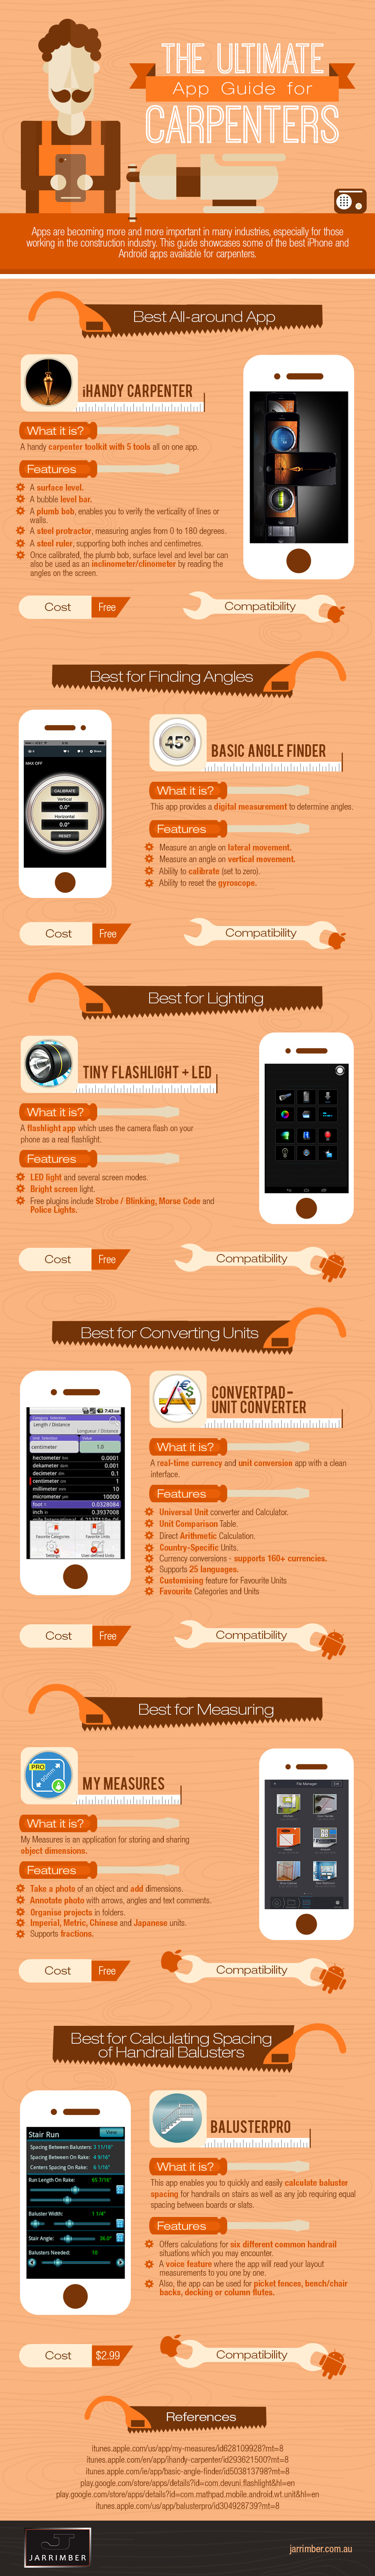 The-Ultimate-App-Guide-for-Carpenters-Infographic